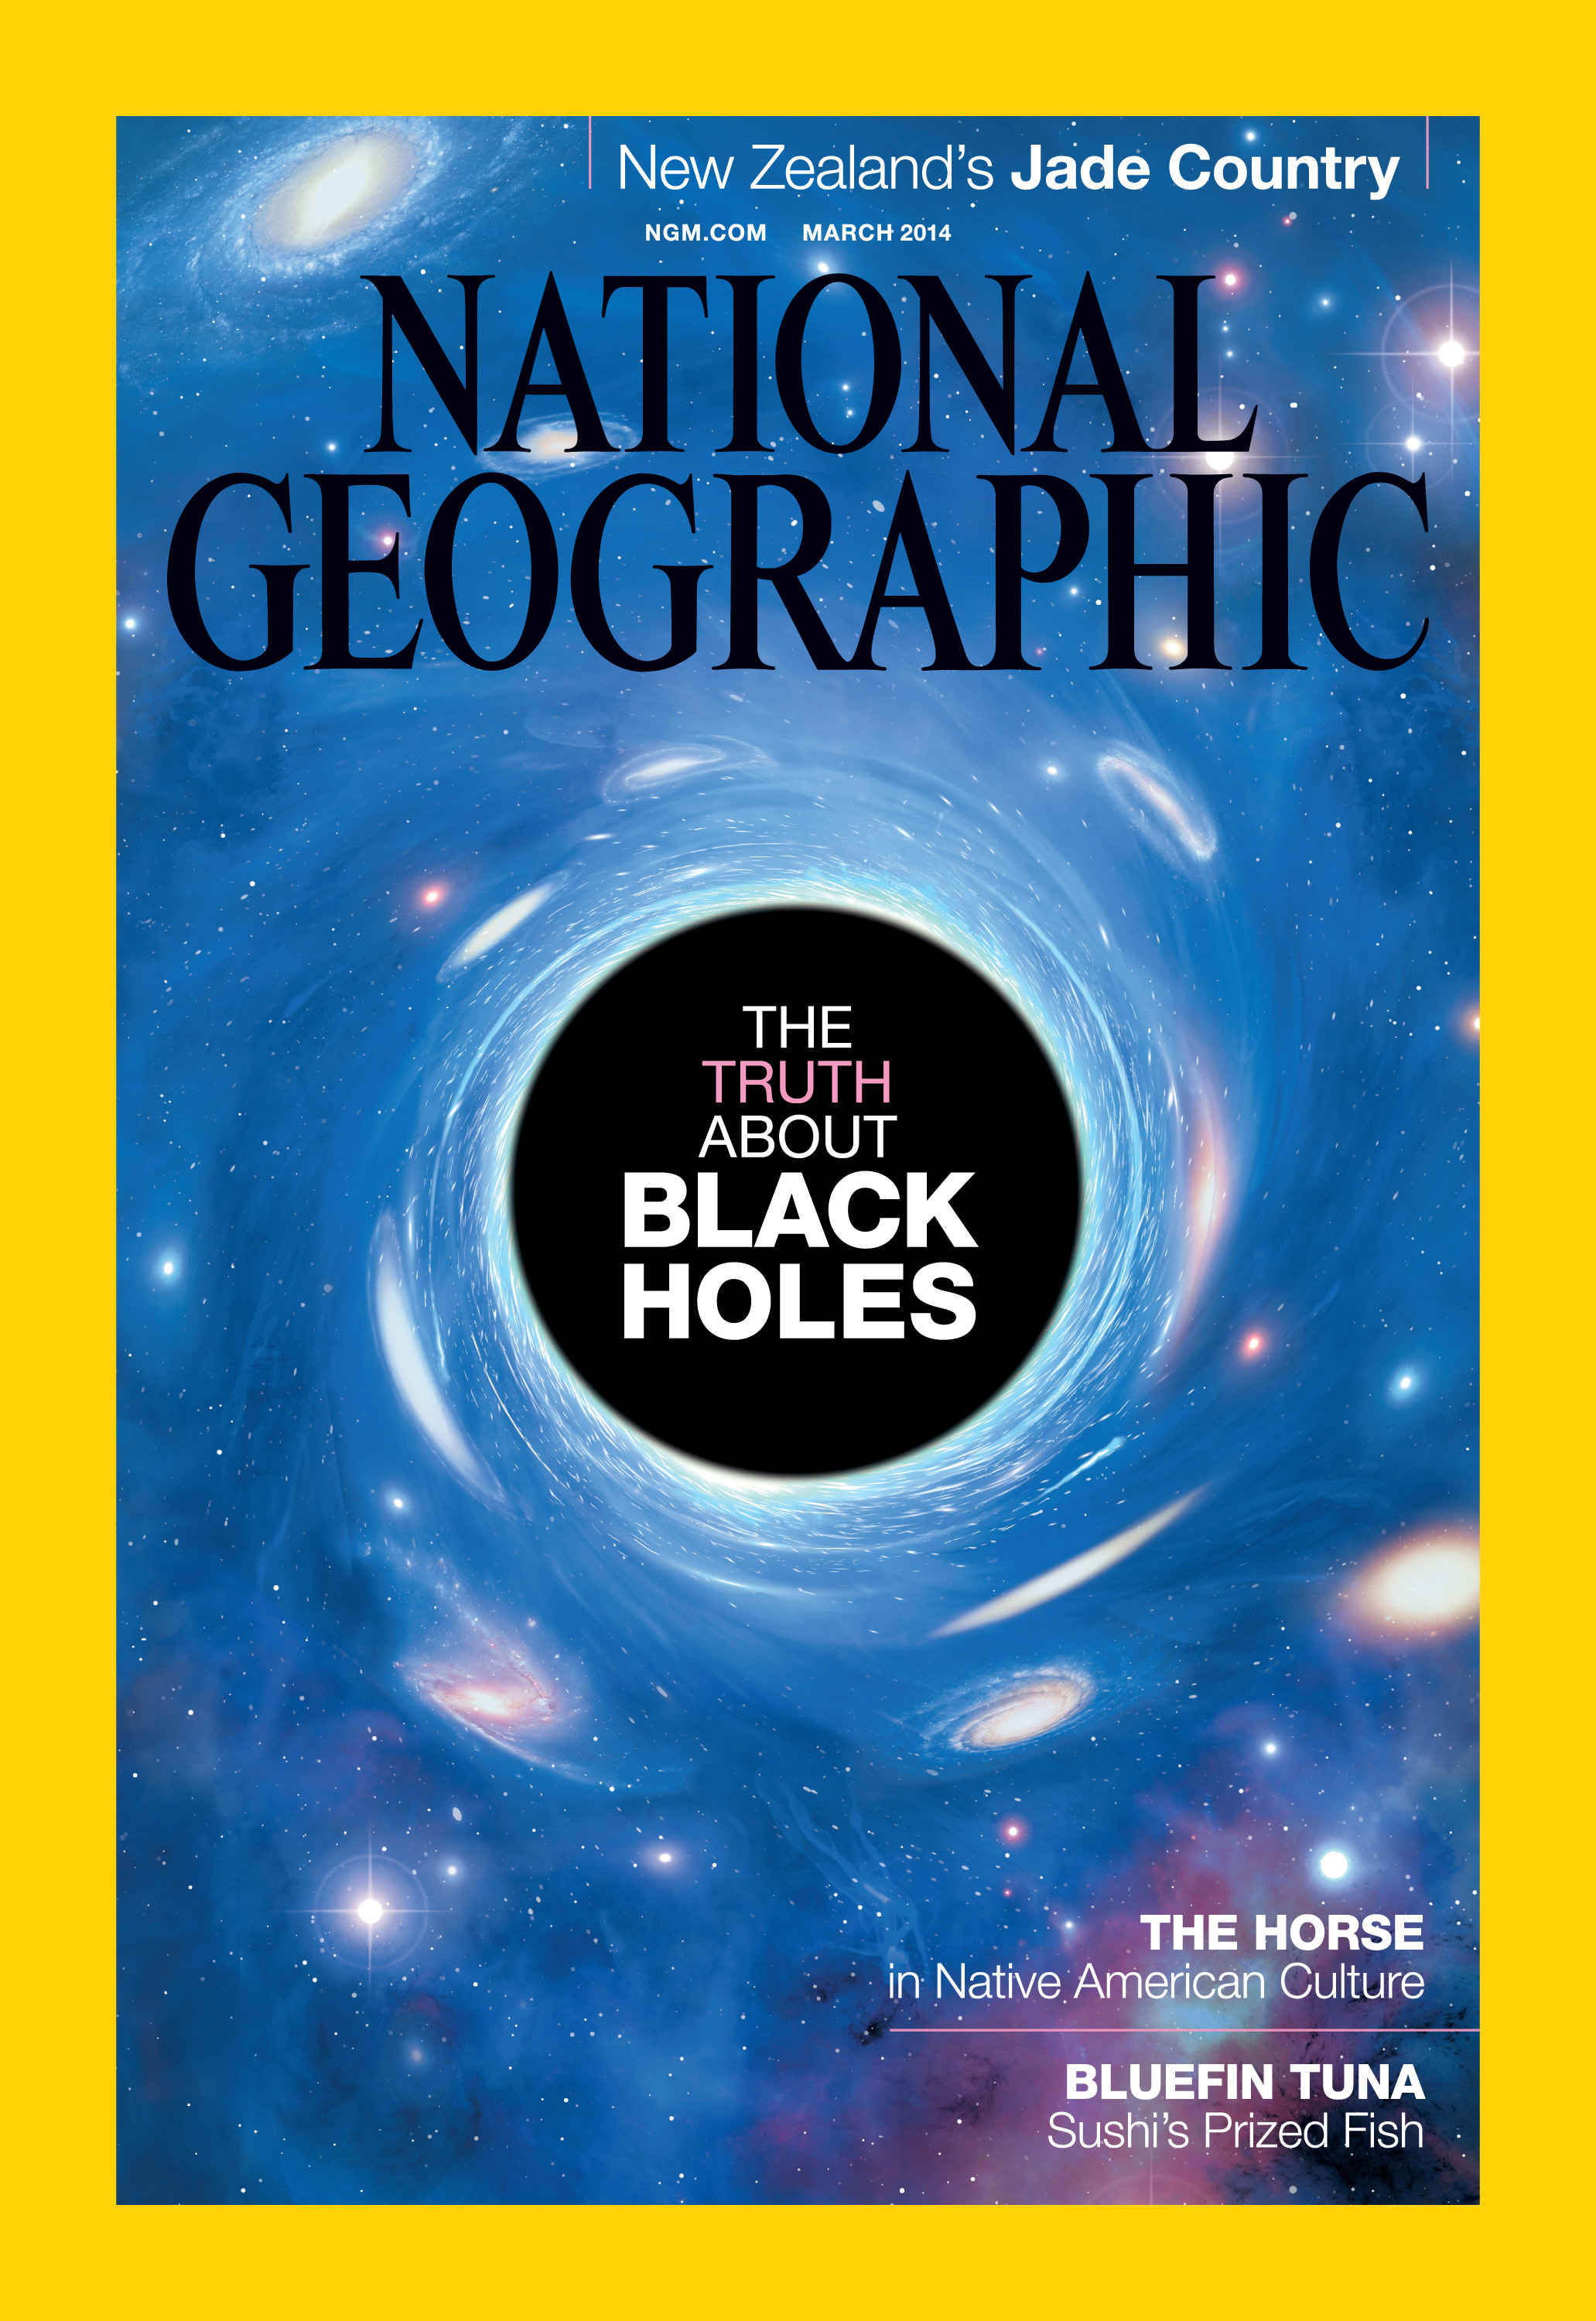 national-geographic-magazine-lays-off-9-of-staff-the-mary-sue